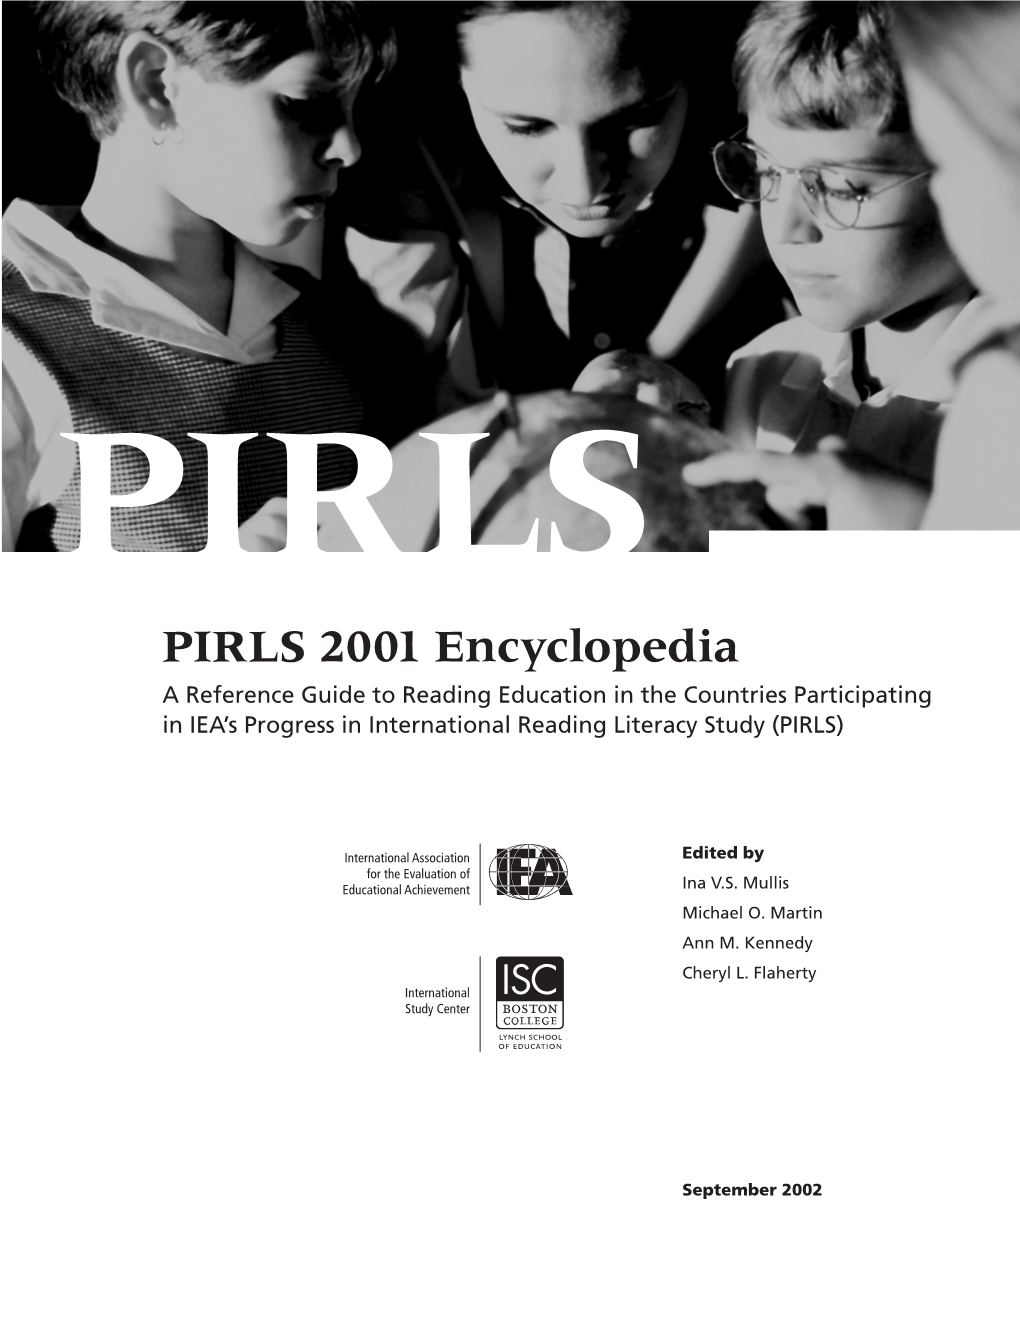 PIRLS 2001 Encyclopedia a Reference Guide to Reading Education in the Countries Participating in IEA’S Progress in International Reading Literacy Study (PIRLS)